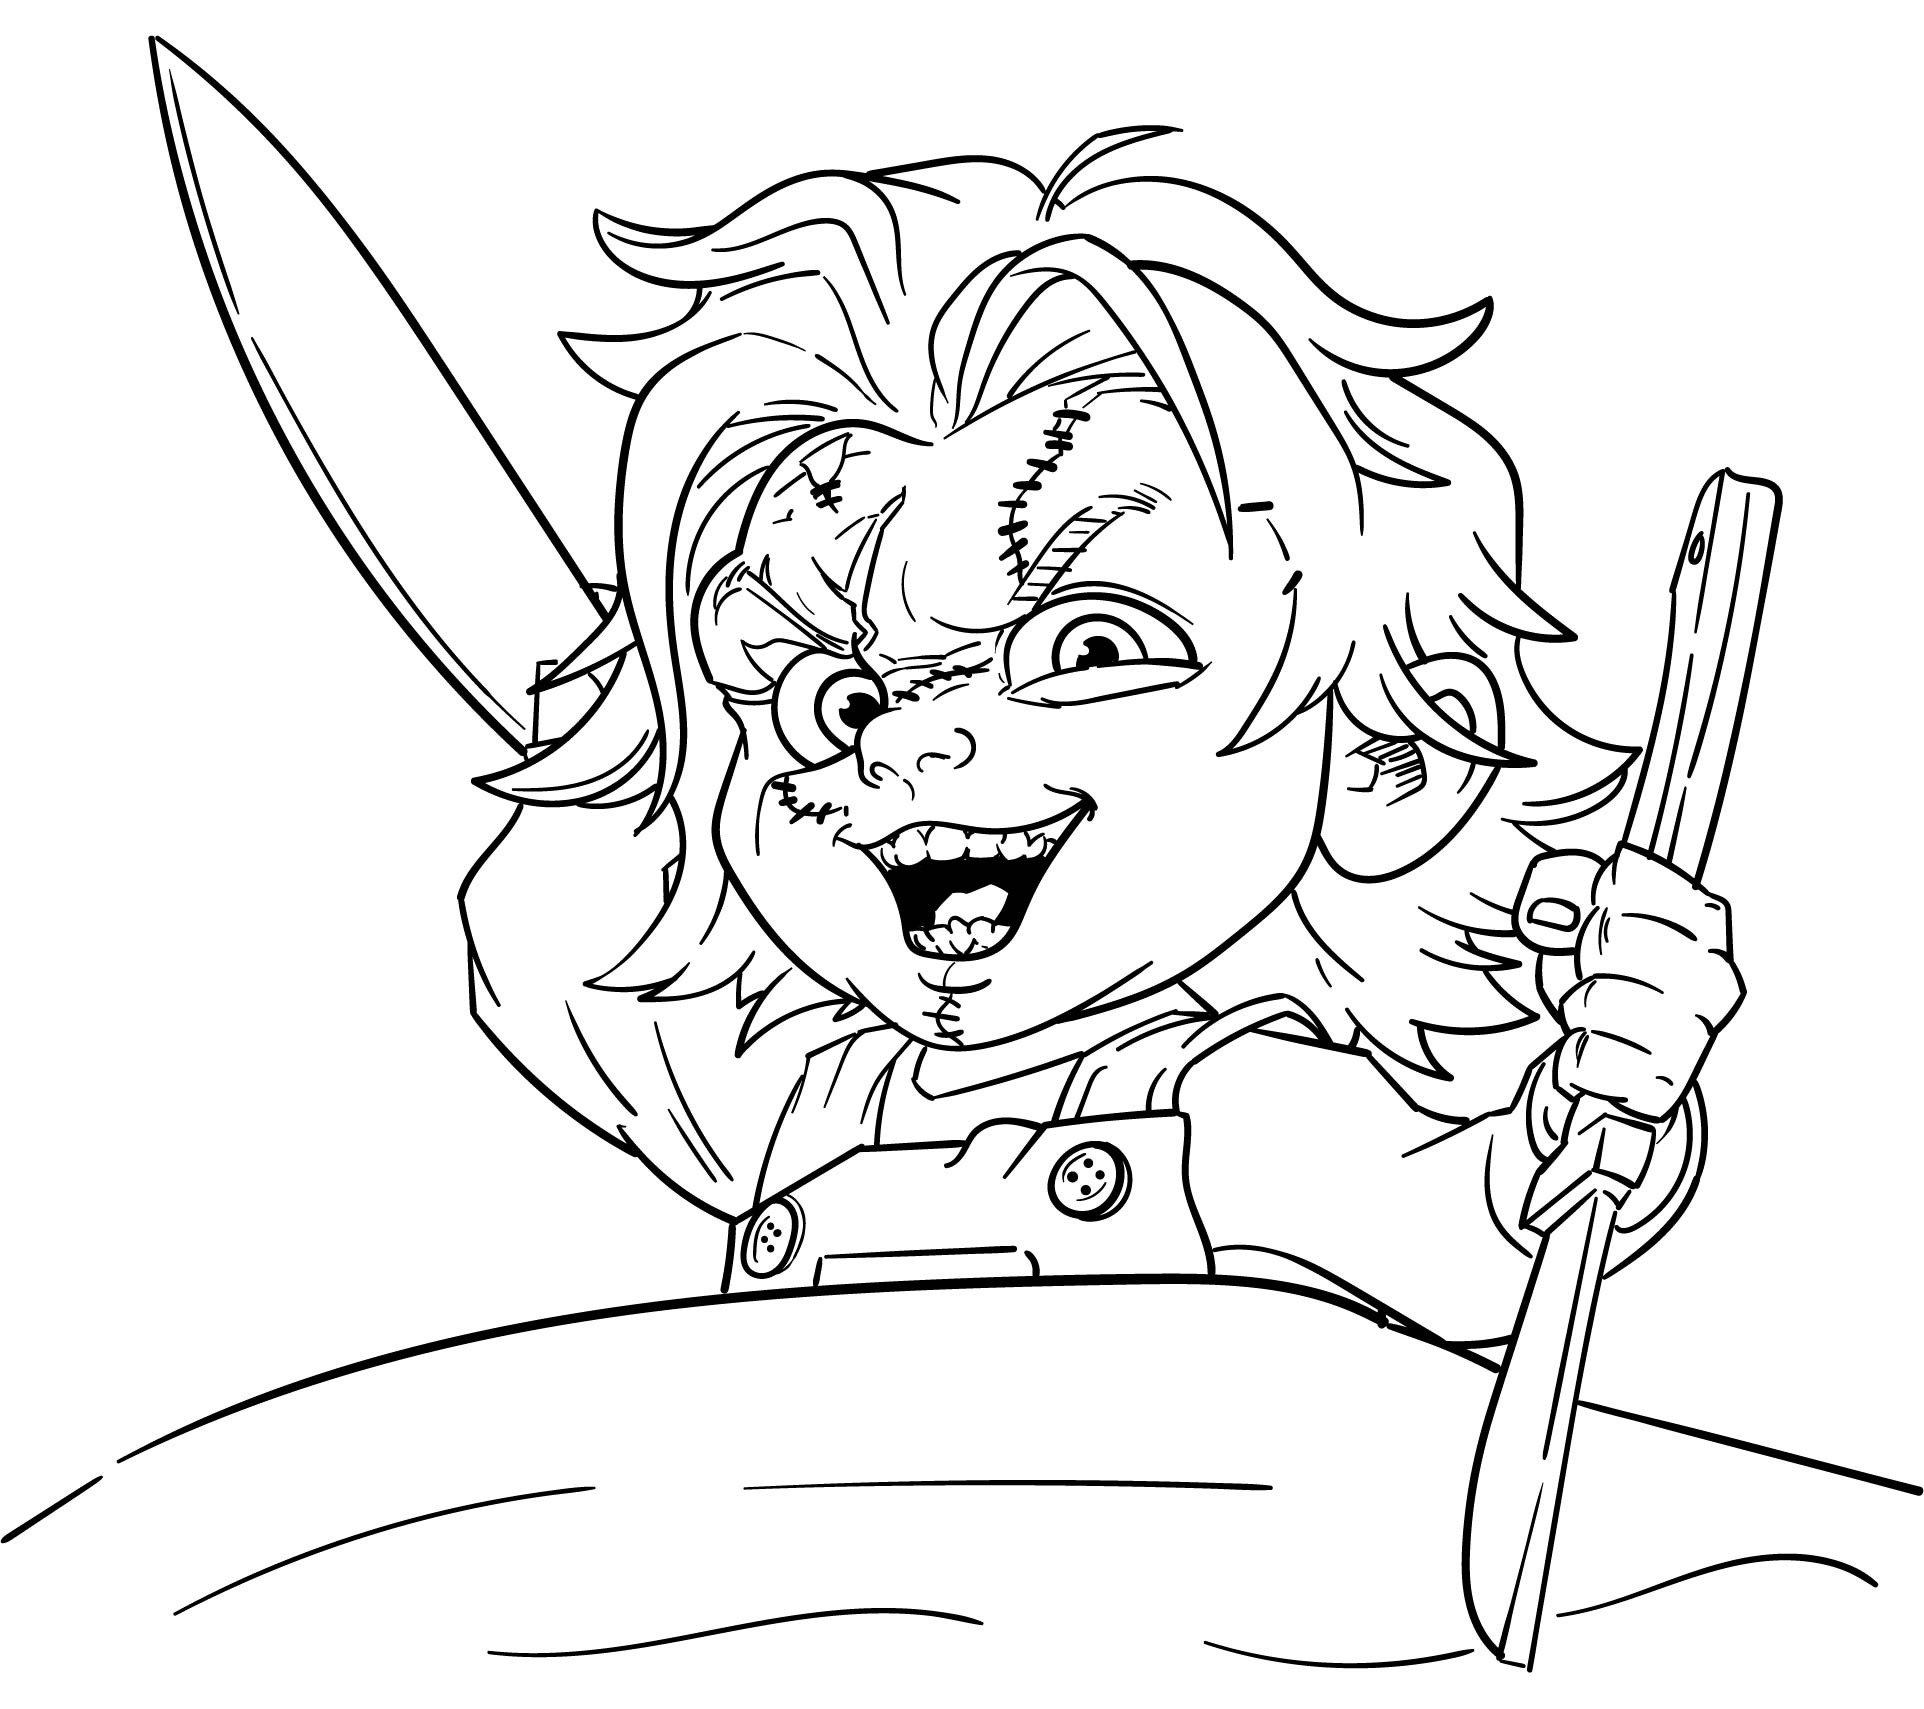 Chucky Coloring Pages